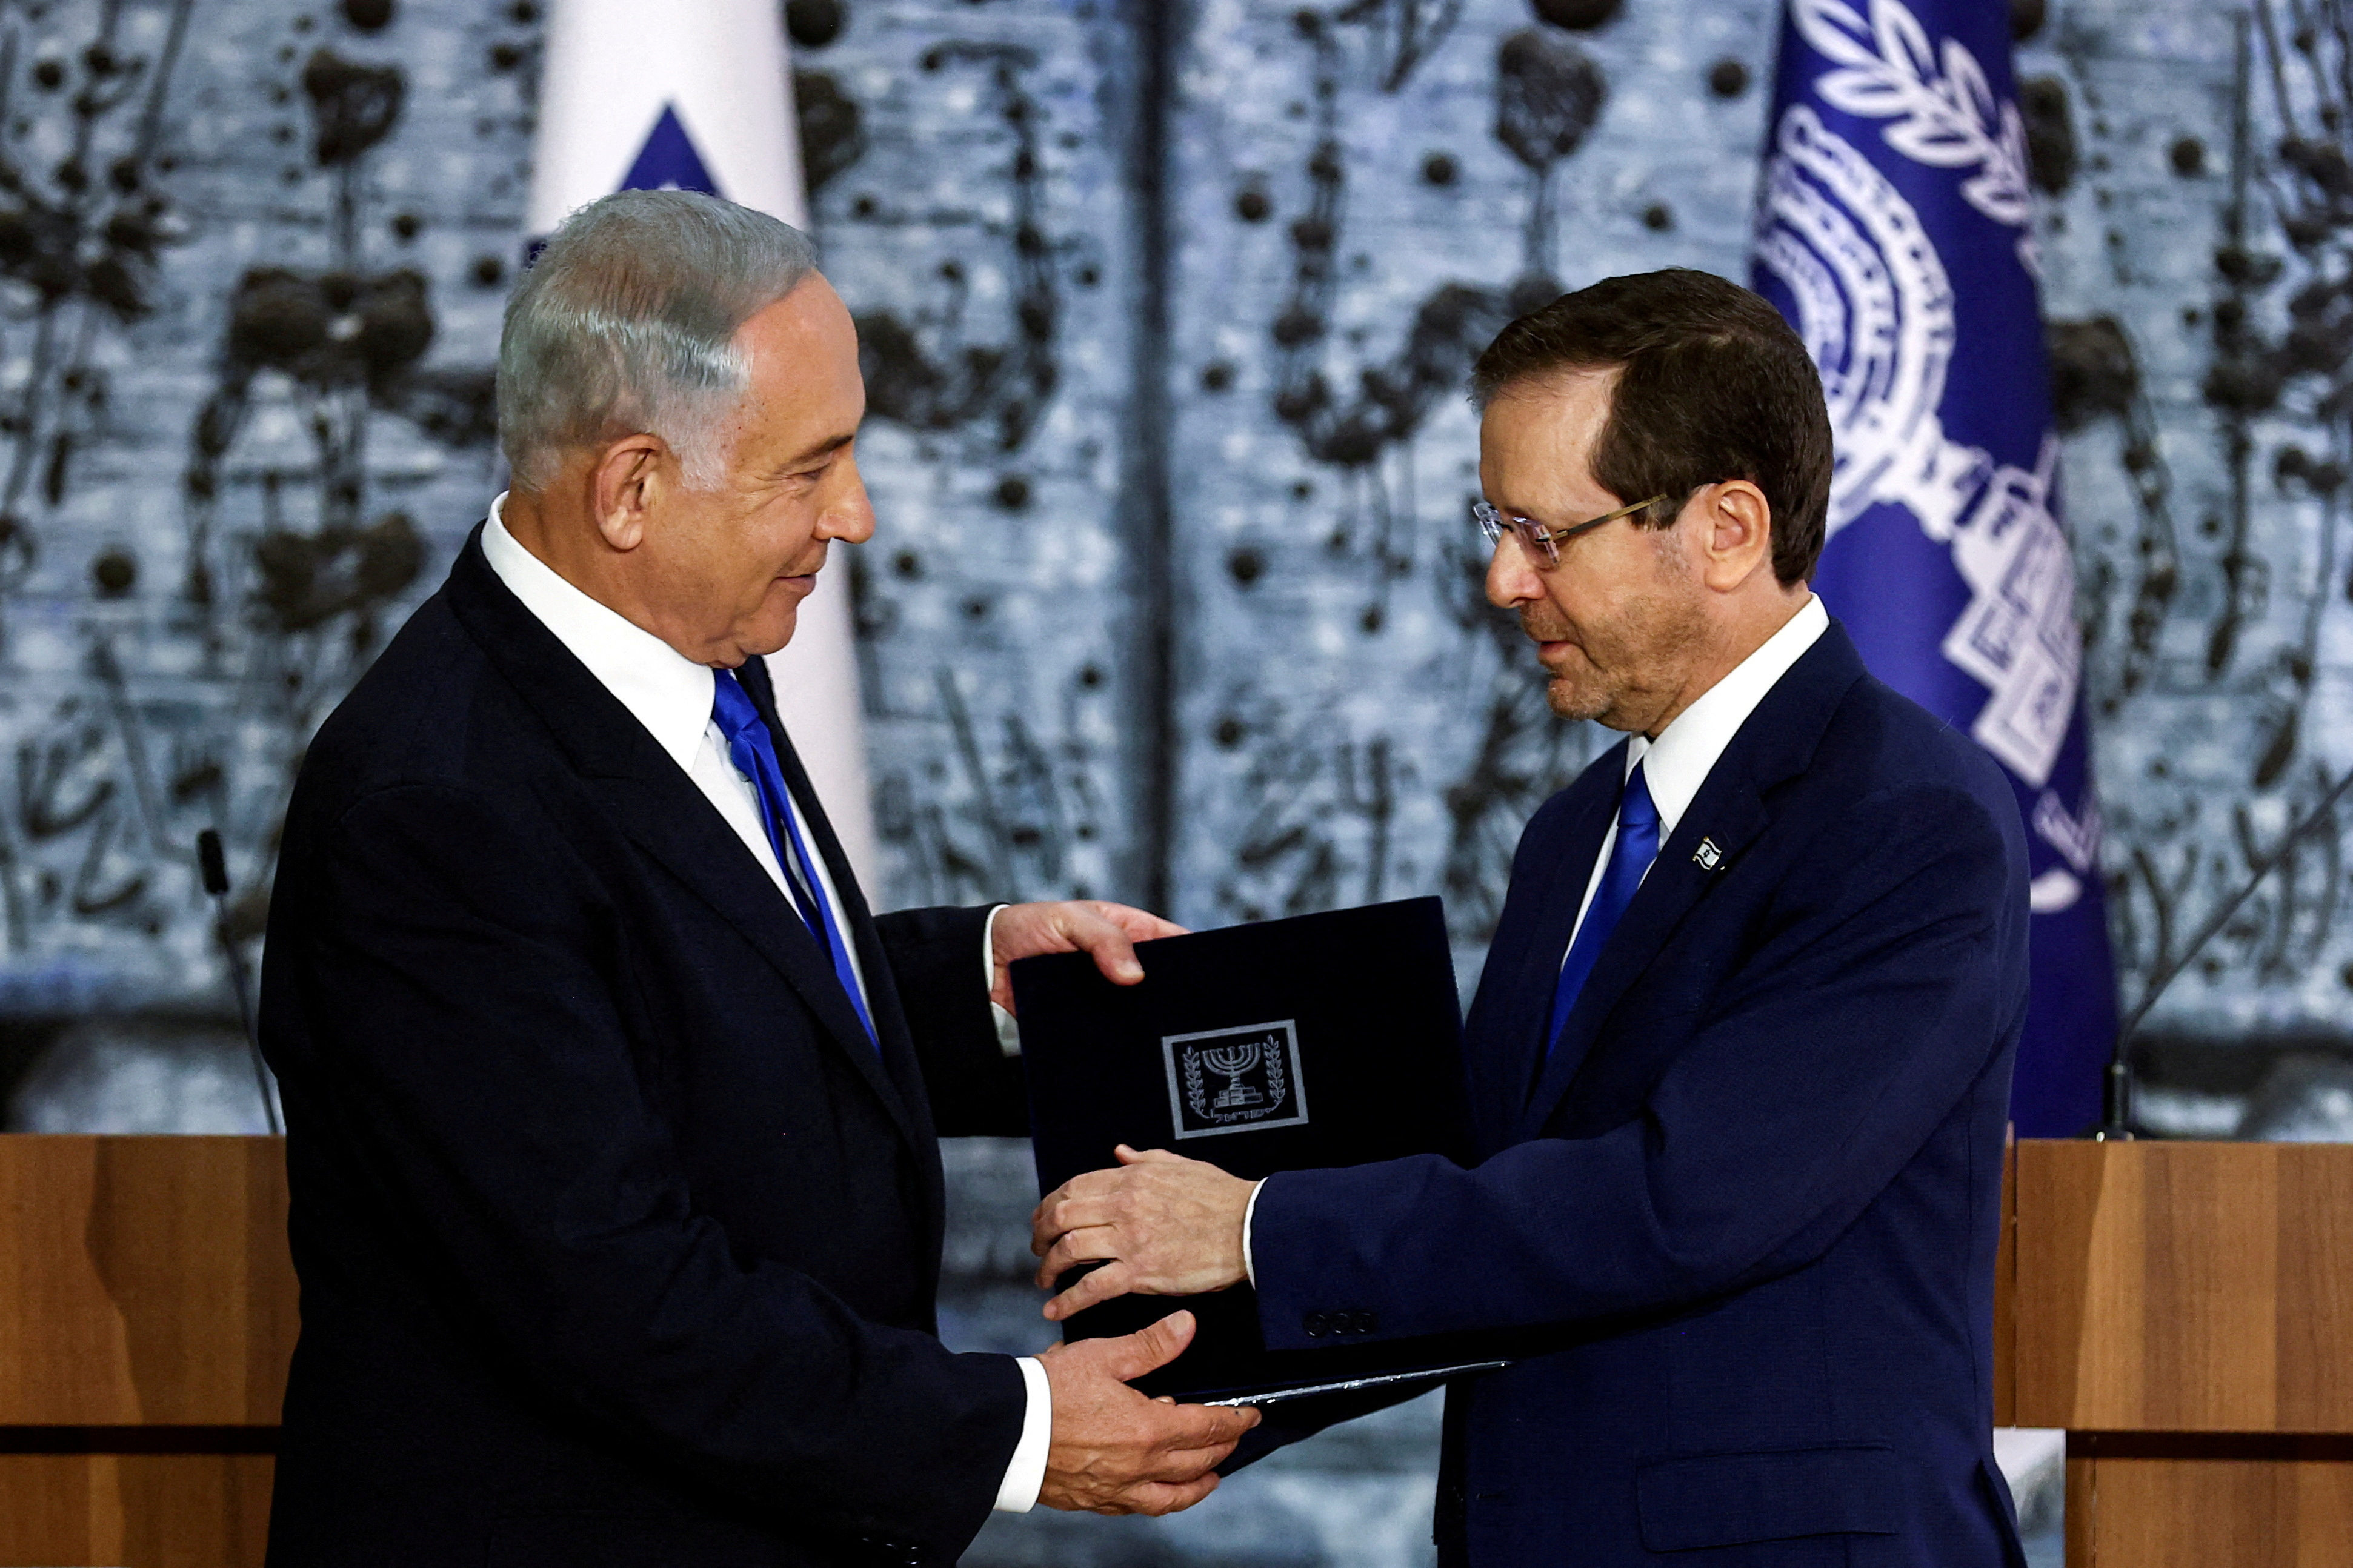 Israel President Isaac Herzog hands Benjamin Netanyahu the mandate to form a new government following the election victory of the former premier's right-wing alliance